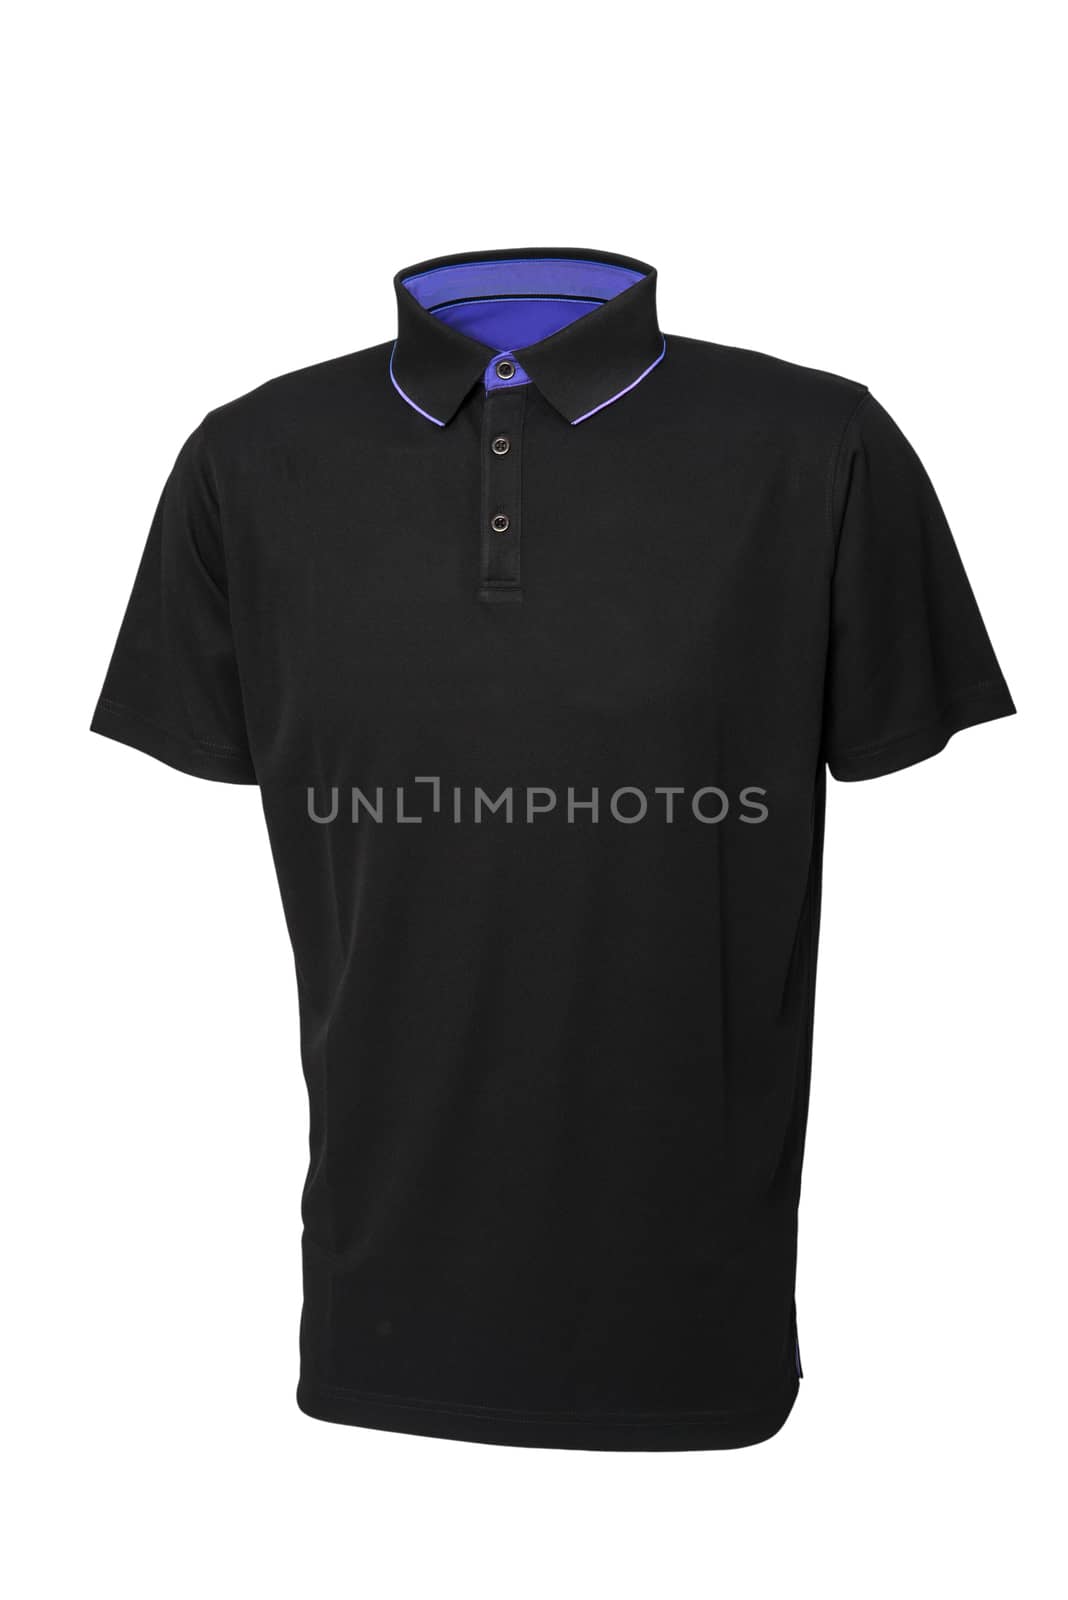 Black tee shirt  with inside blue collar isolated by praethip